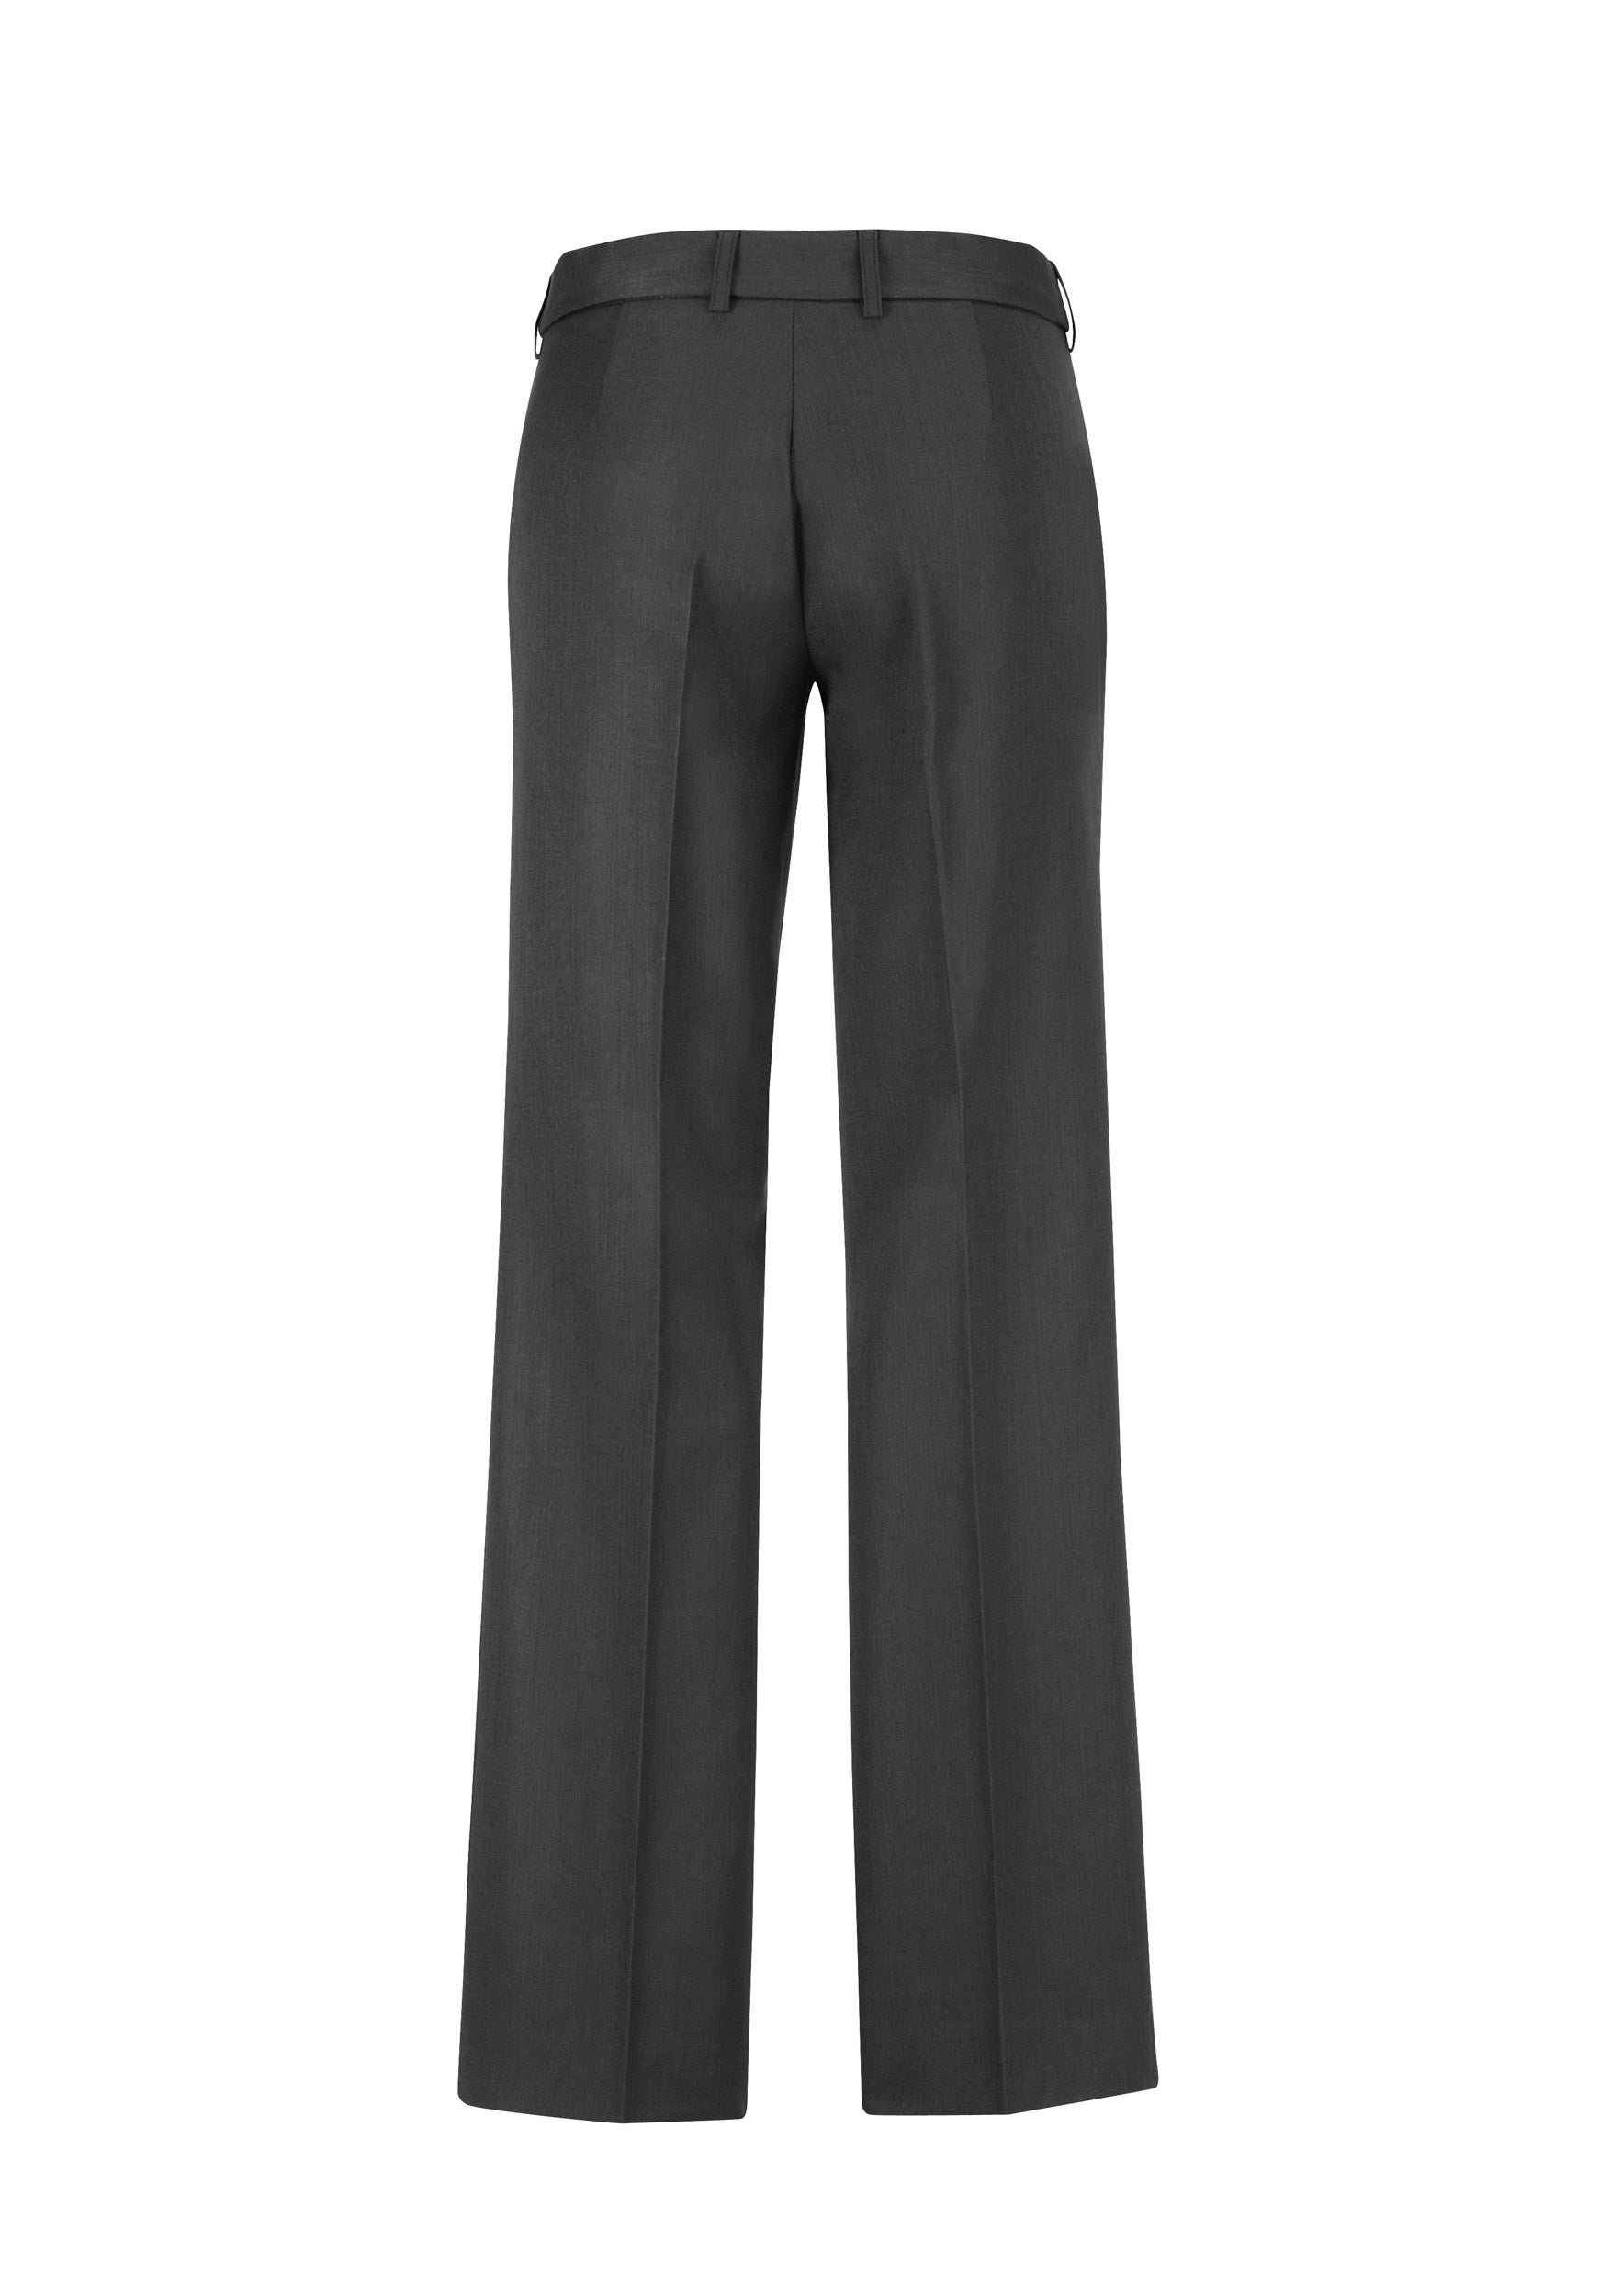 Womens Cool Stretch Adjustable Waist Pant